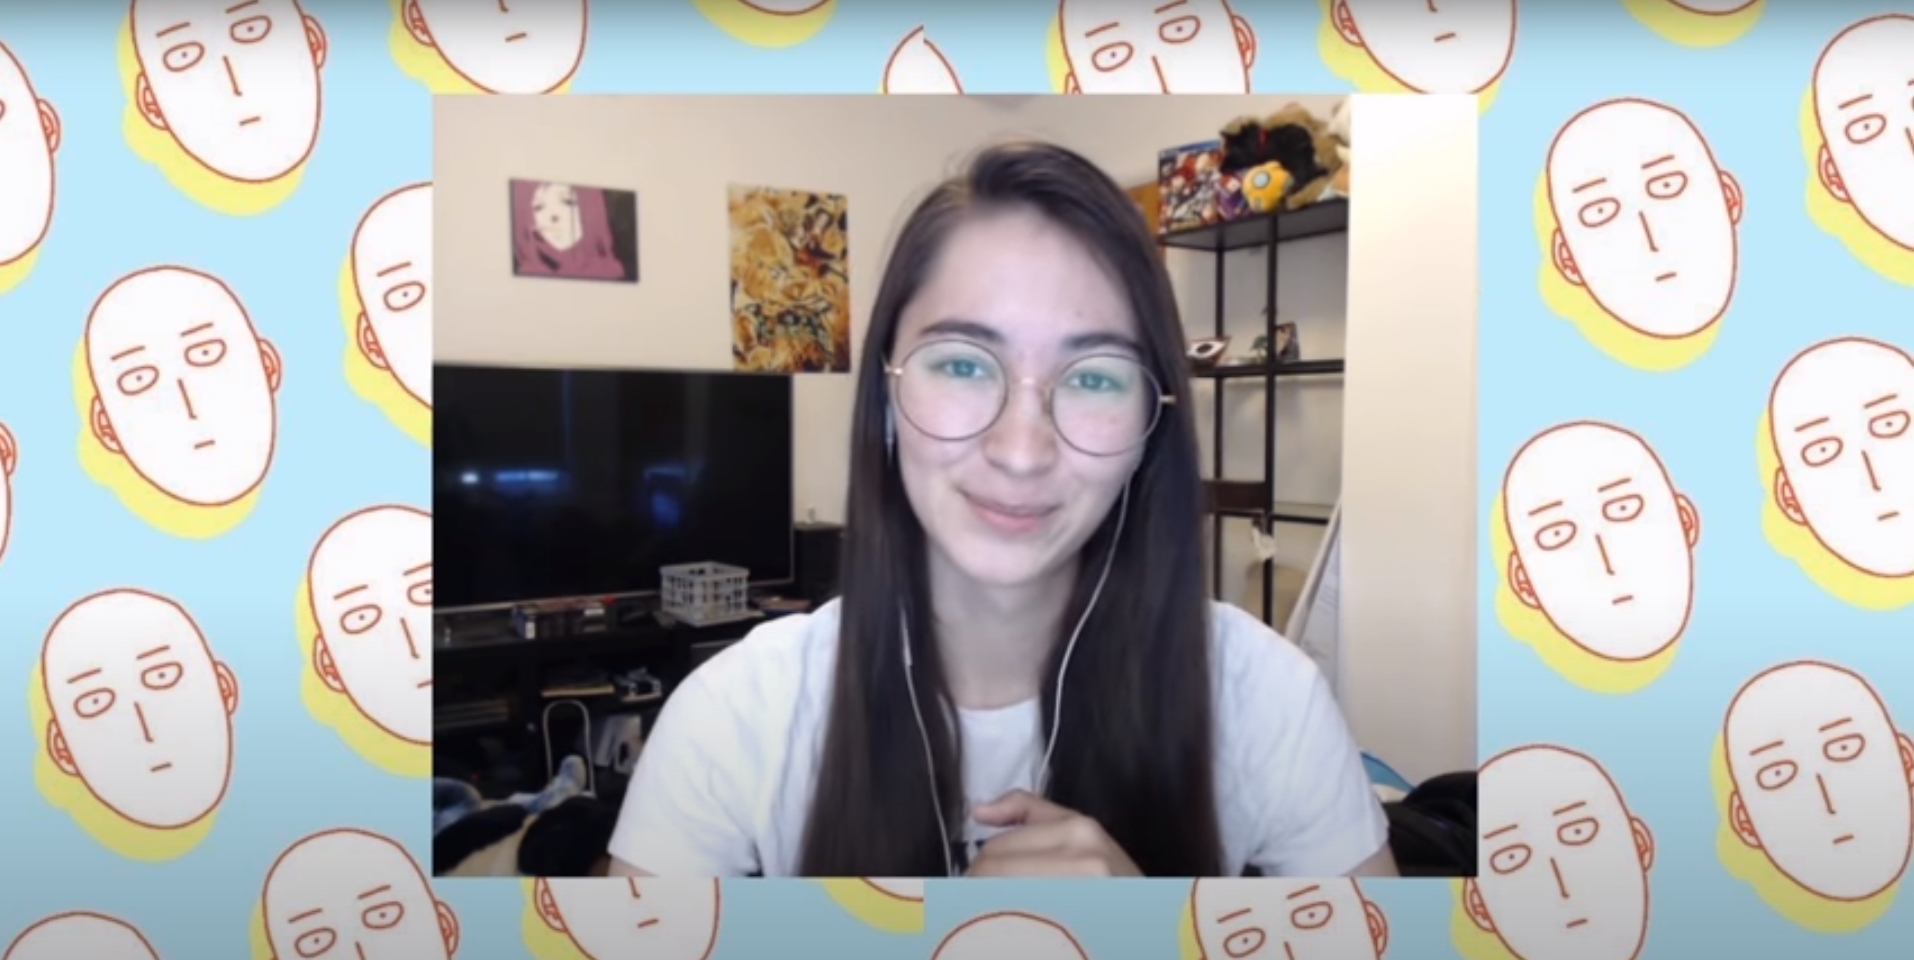 LCS Caster And Resident Meme Queen Ovilee May Announces She Won’t Be Part of League Of Legends’ LCS Summer Split Casting Team